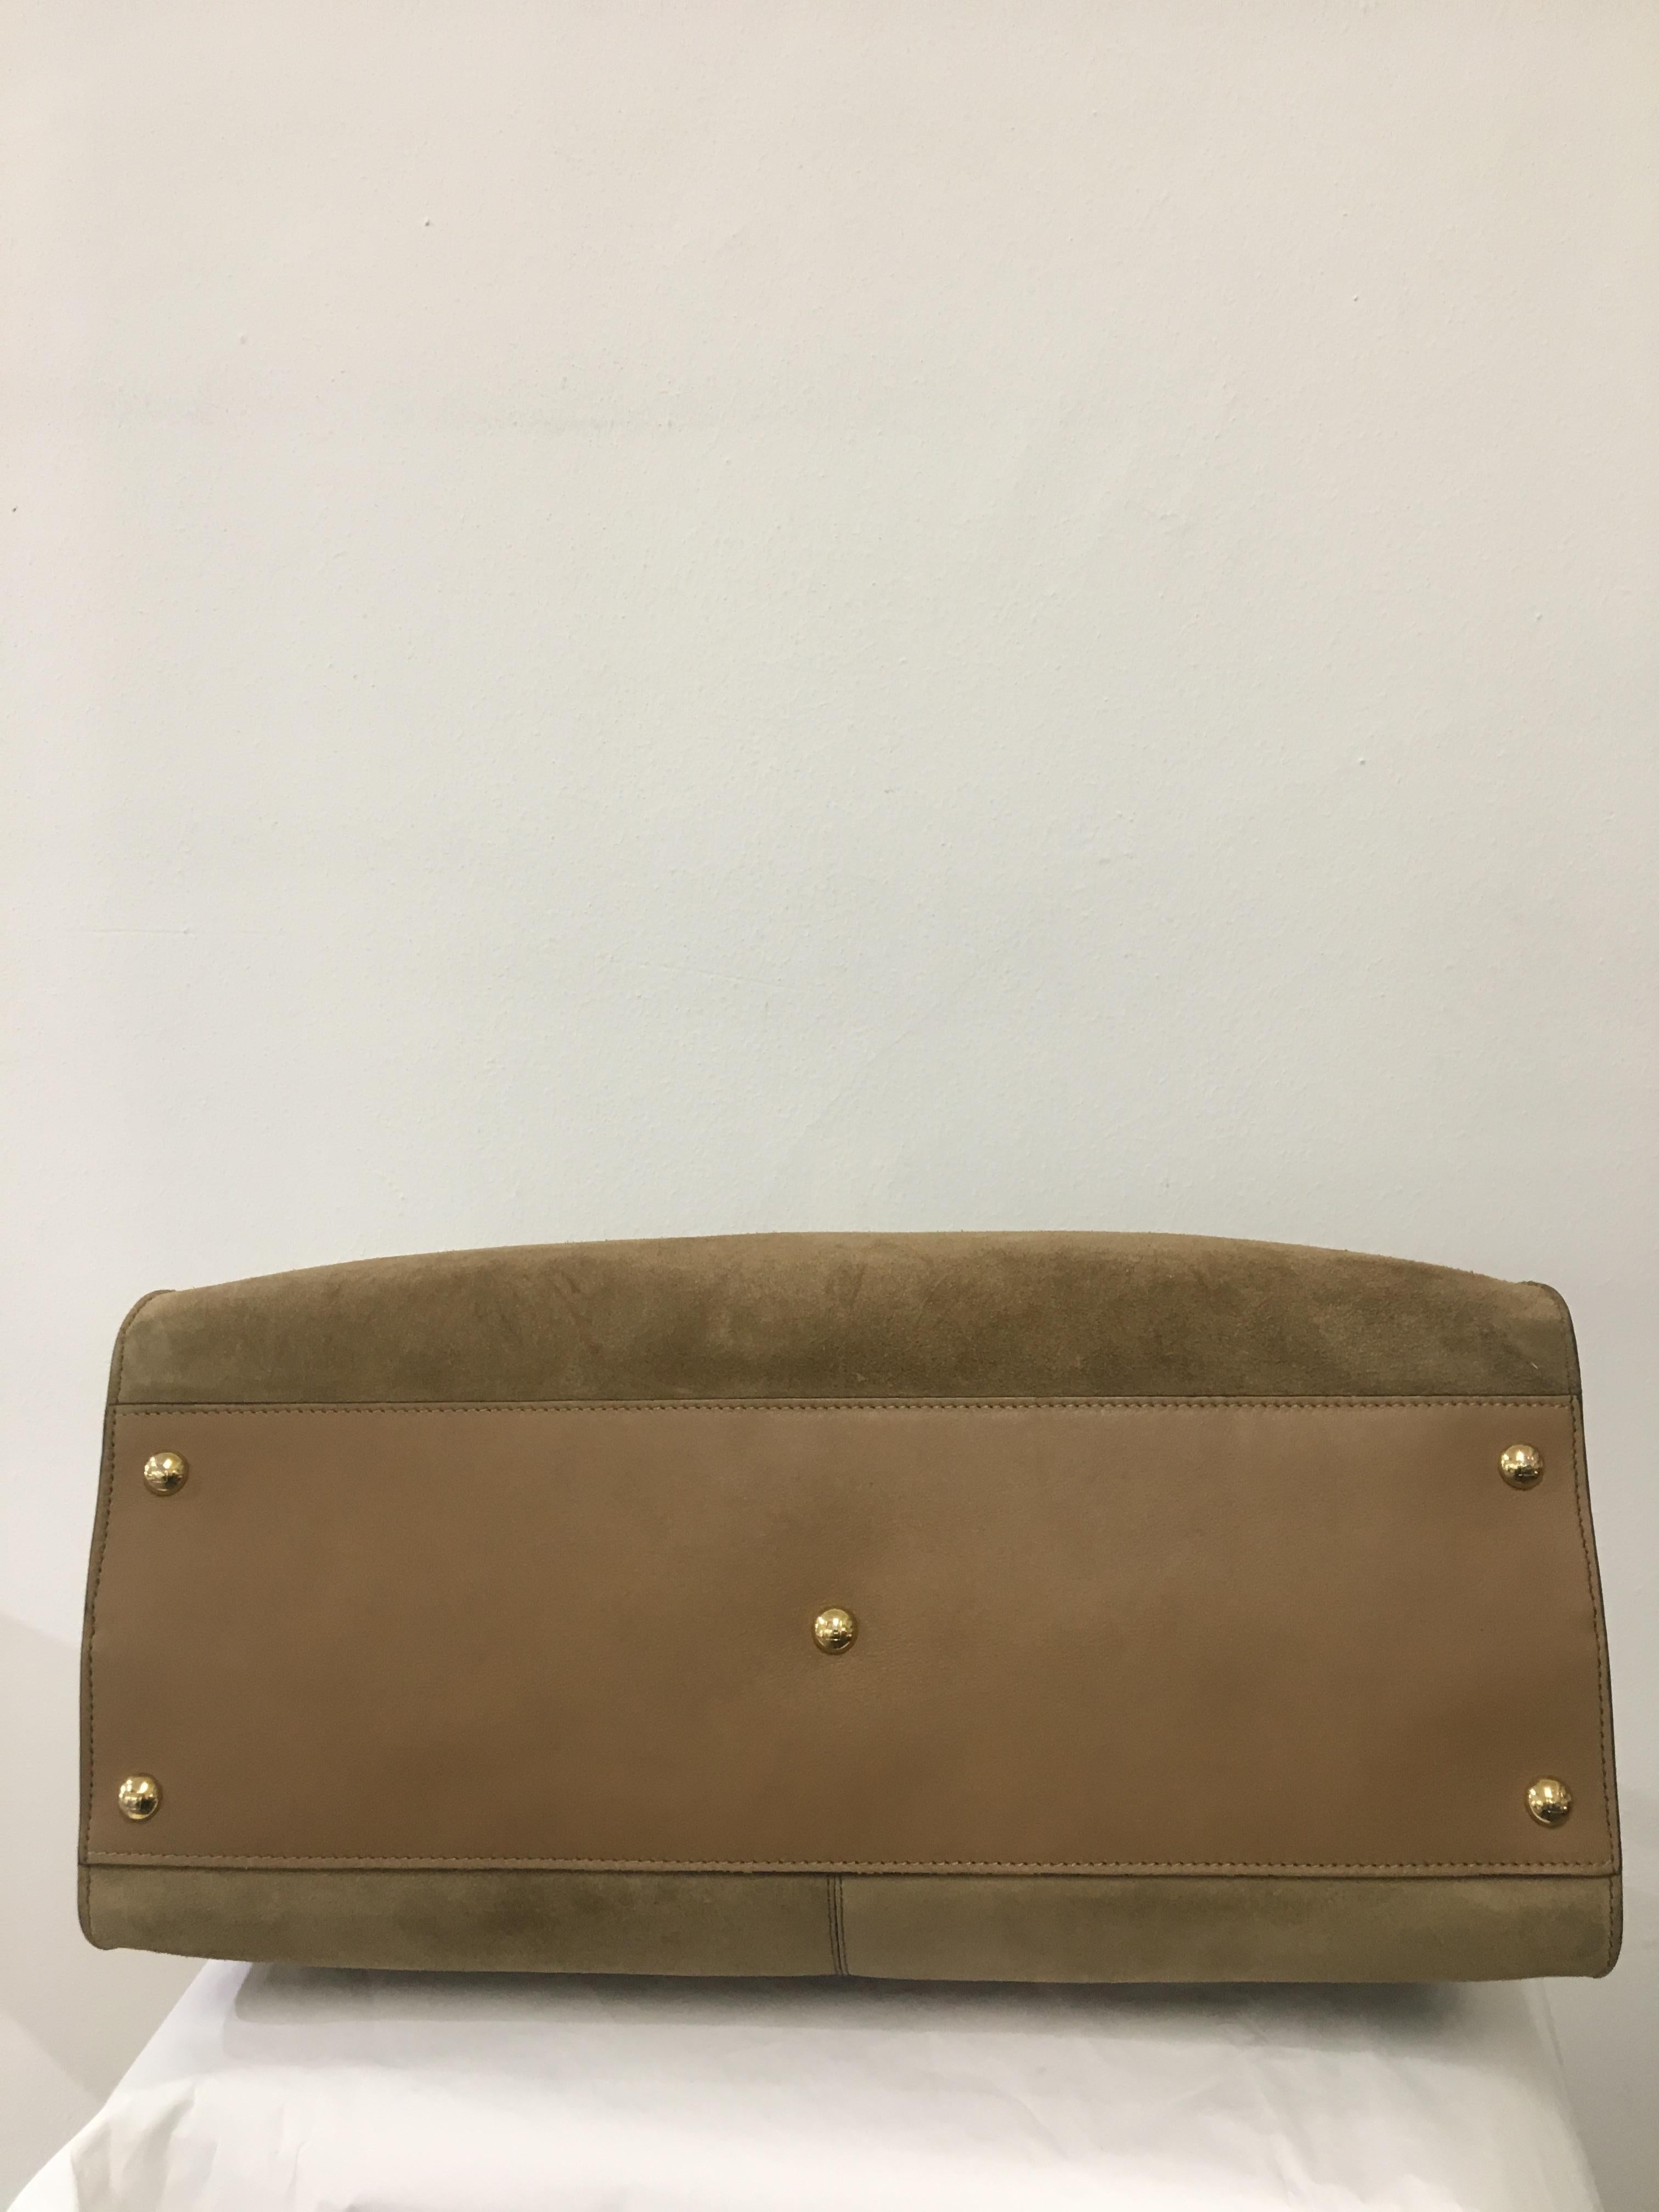 Brown Fendi Peekaboo Bag, Suede, limited edition For Sale